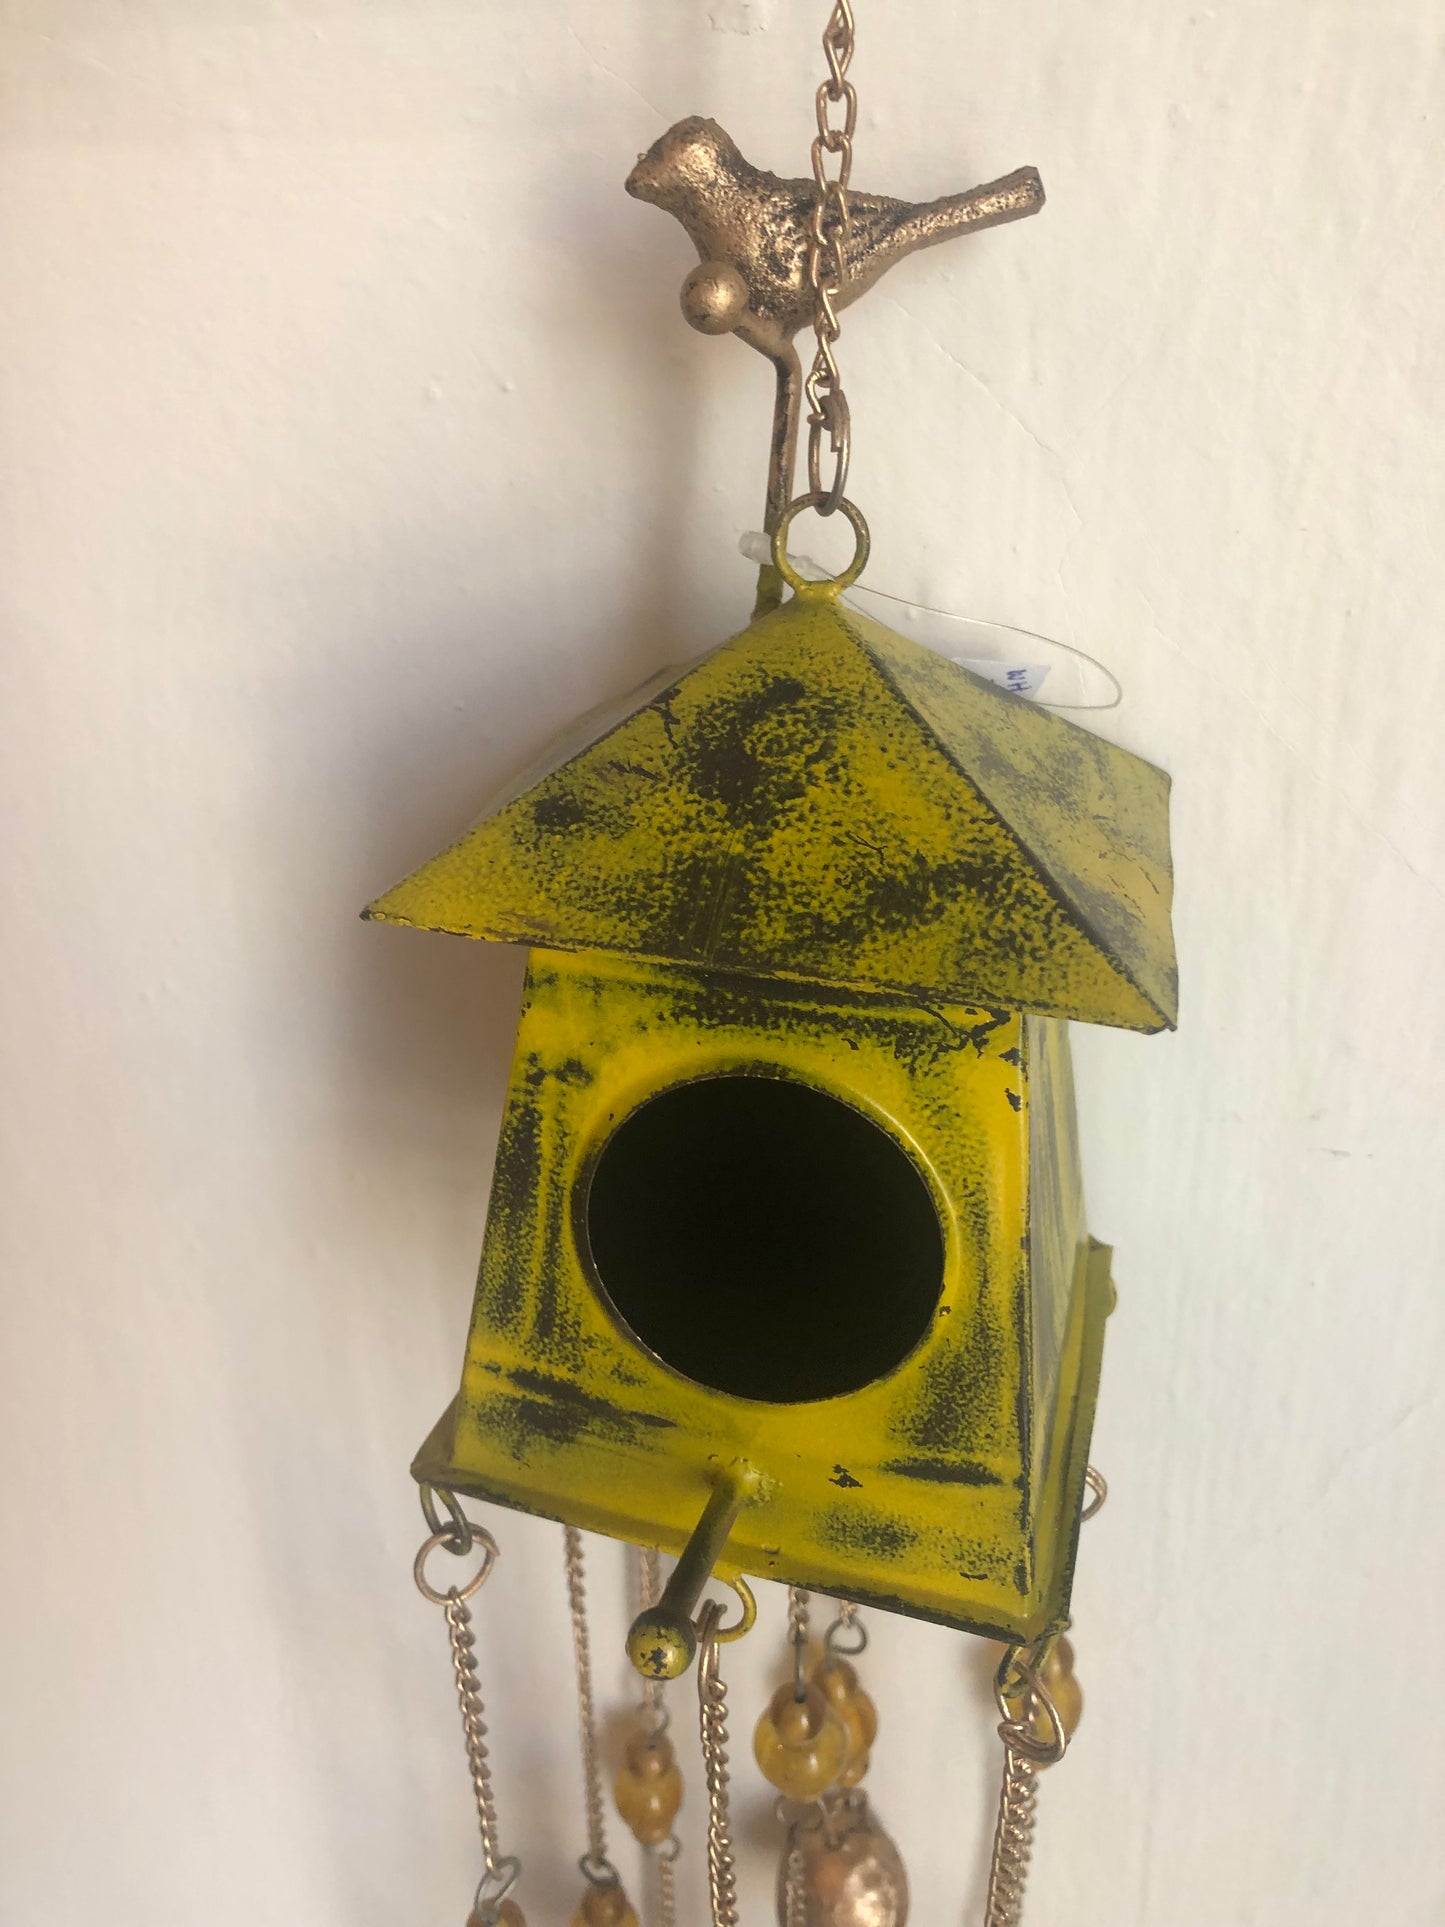 Wind Chime, Fiesta Birdhouse with Ornaments and Mini Cowbells